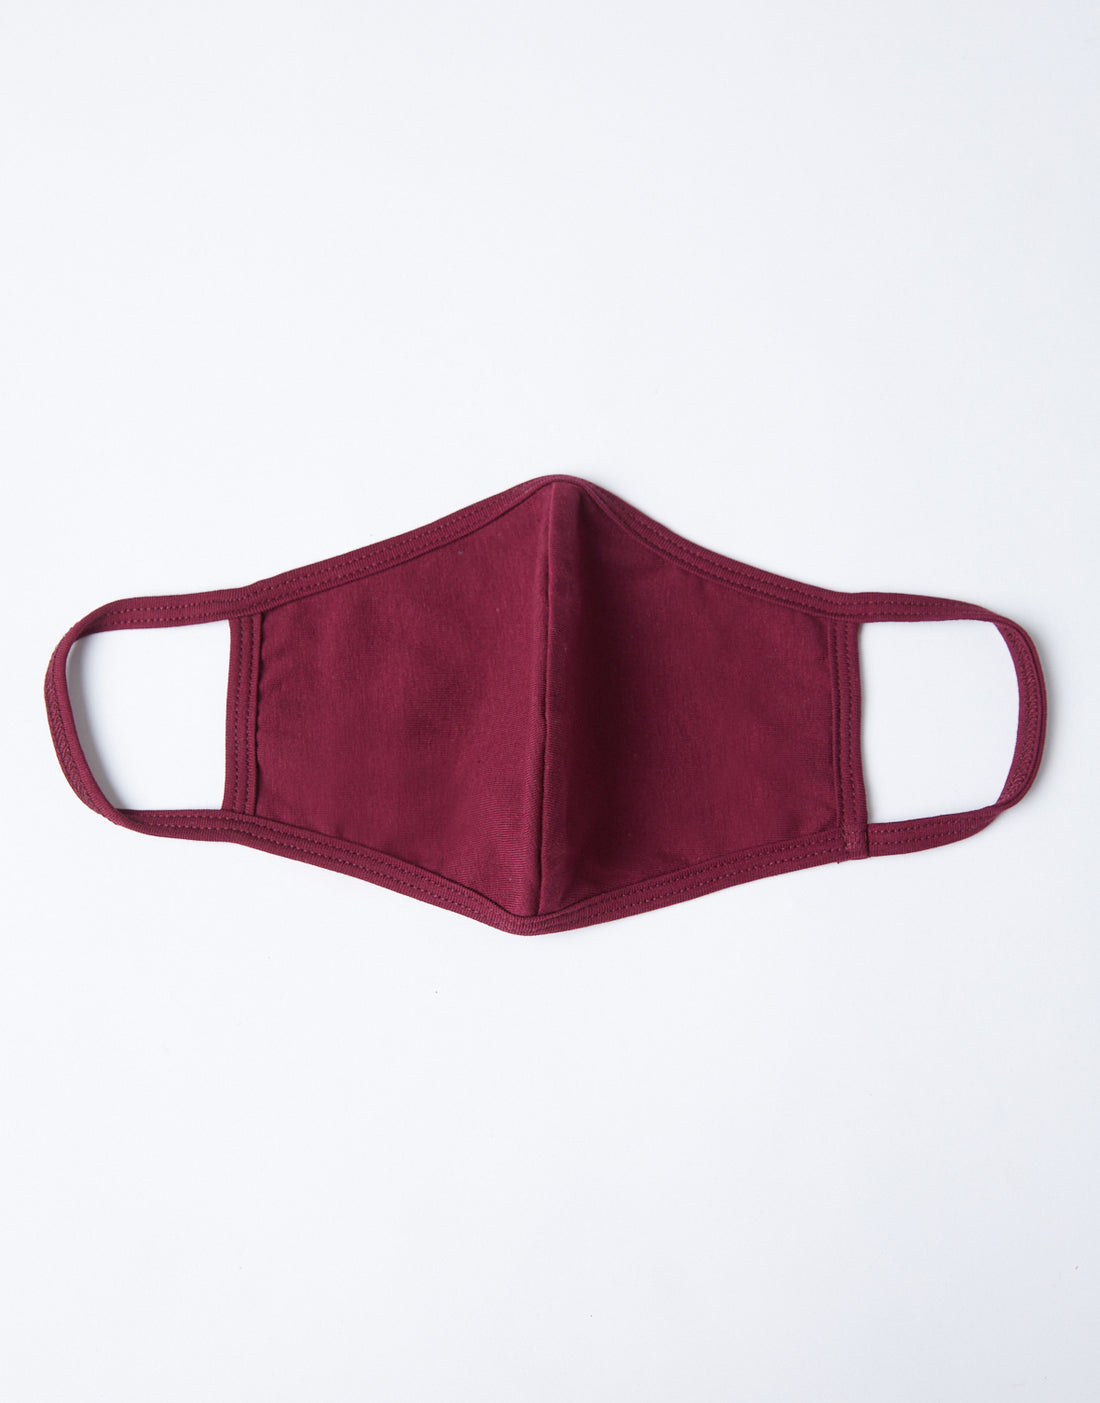 The Simplicity Mask Accessories Burgundy One Size -2020AVE